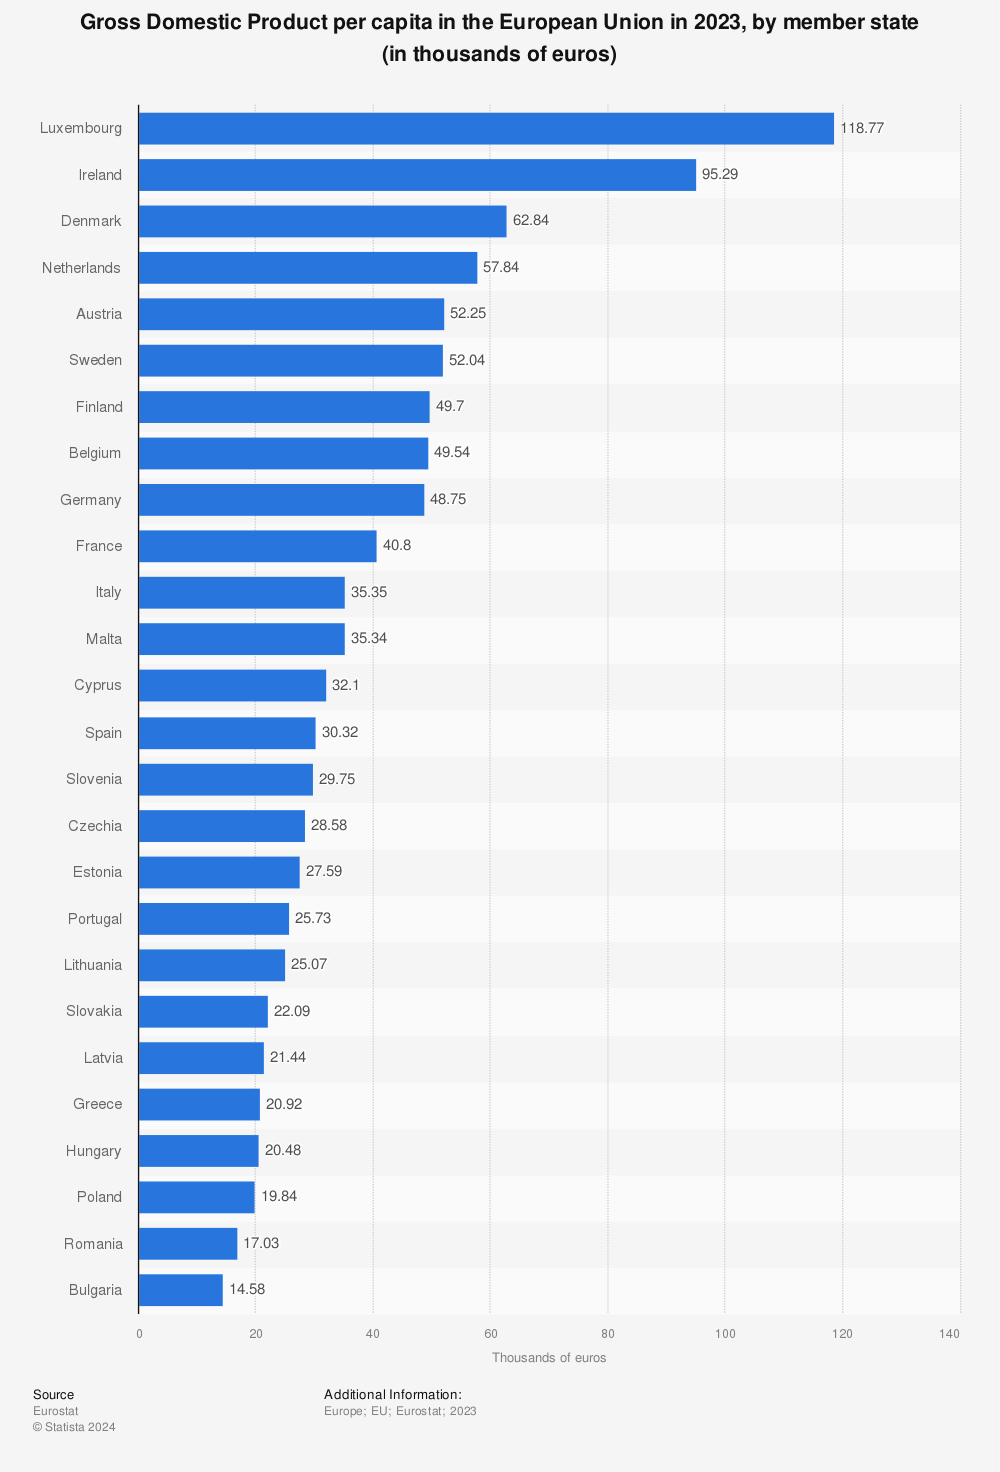 Statistic: Gross Domestic Product per capita in the European Union in 2022, by member state (in Euros) | Statista